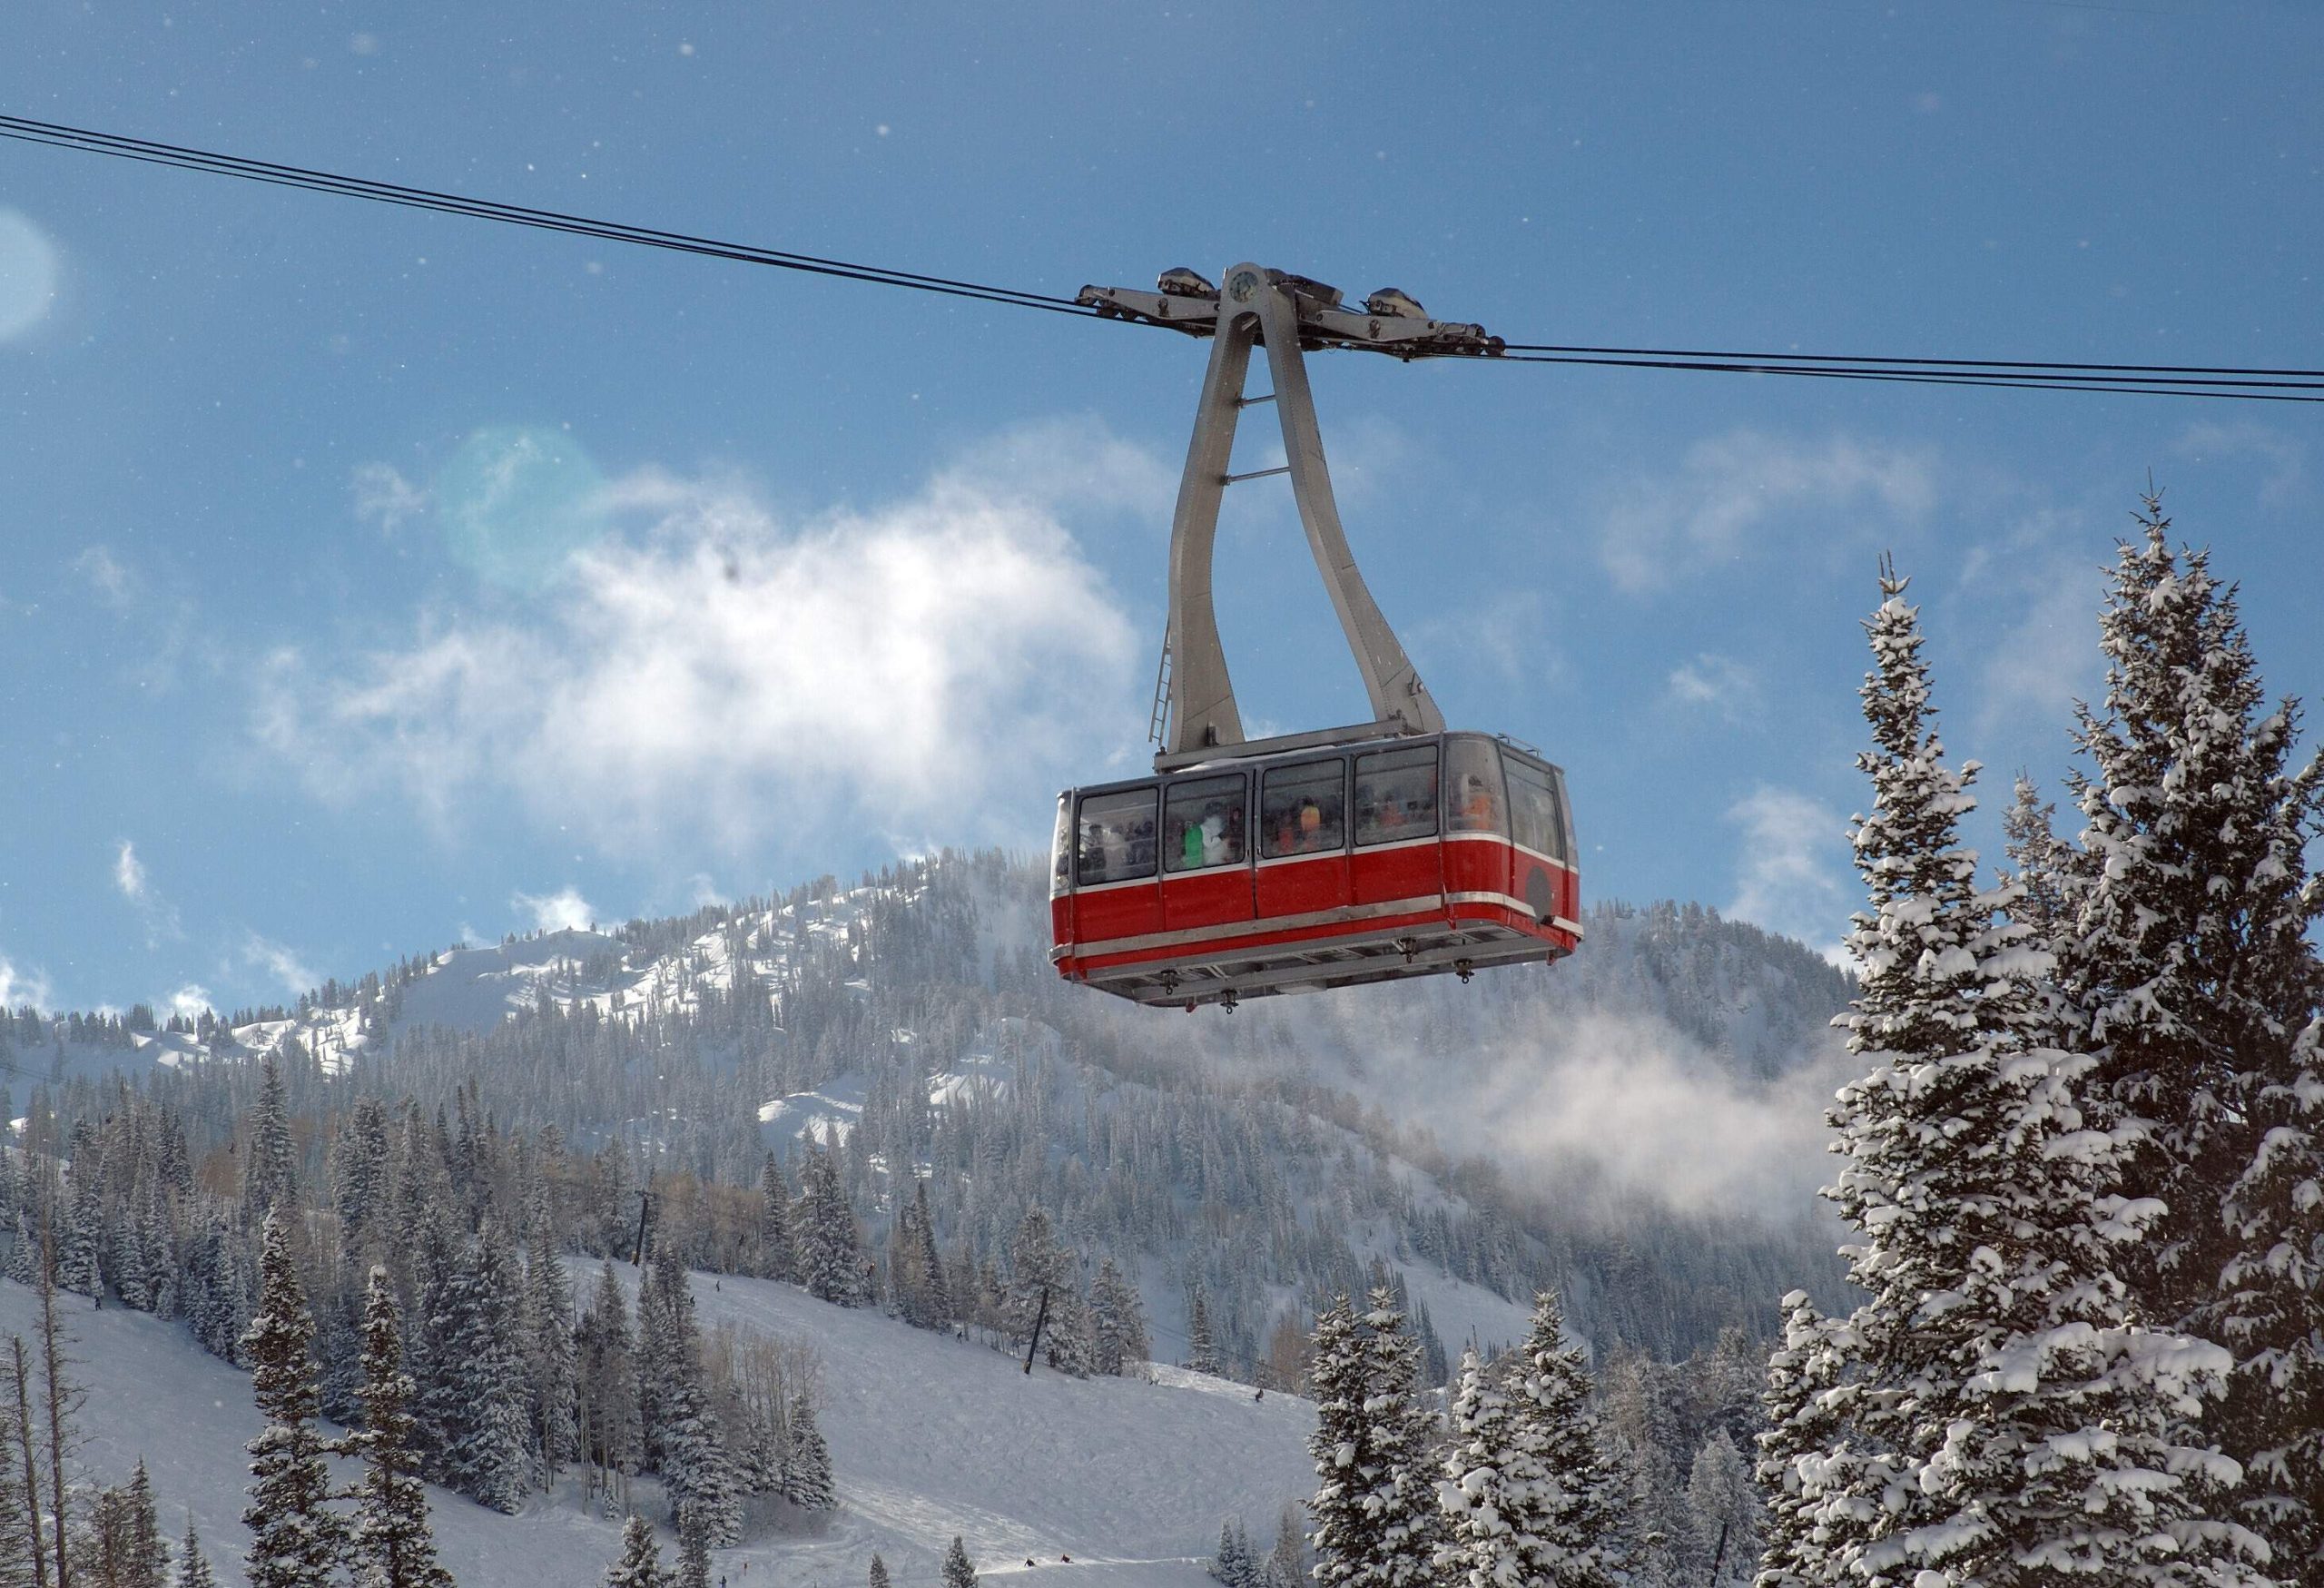 A red gondola suspended above a snowy mountainside surrounded by tall frost-covered trees.